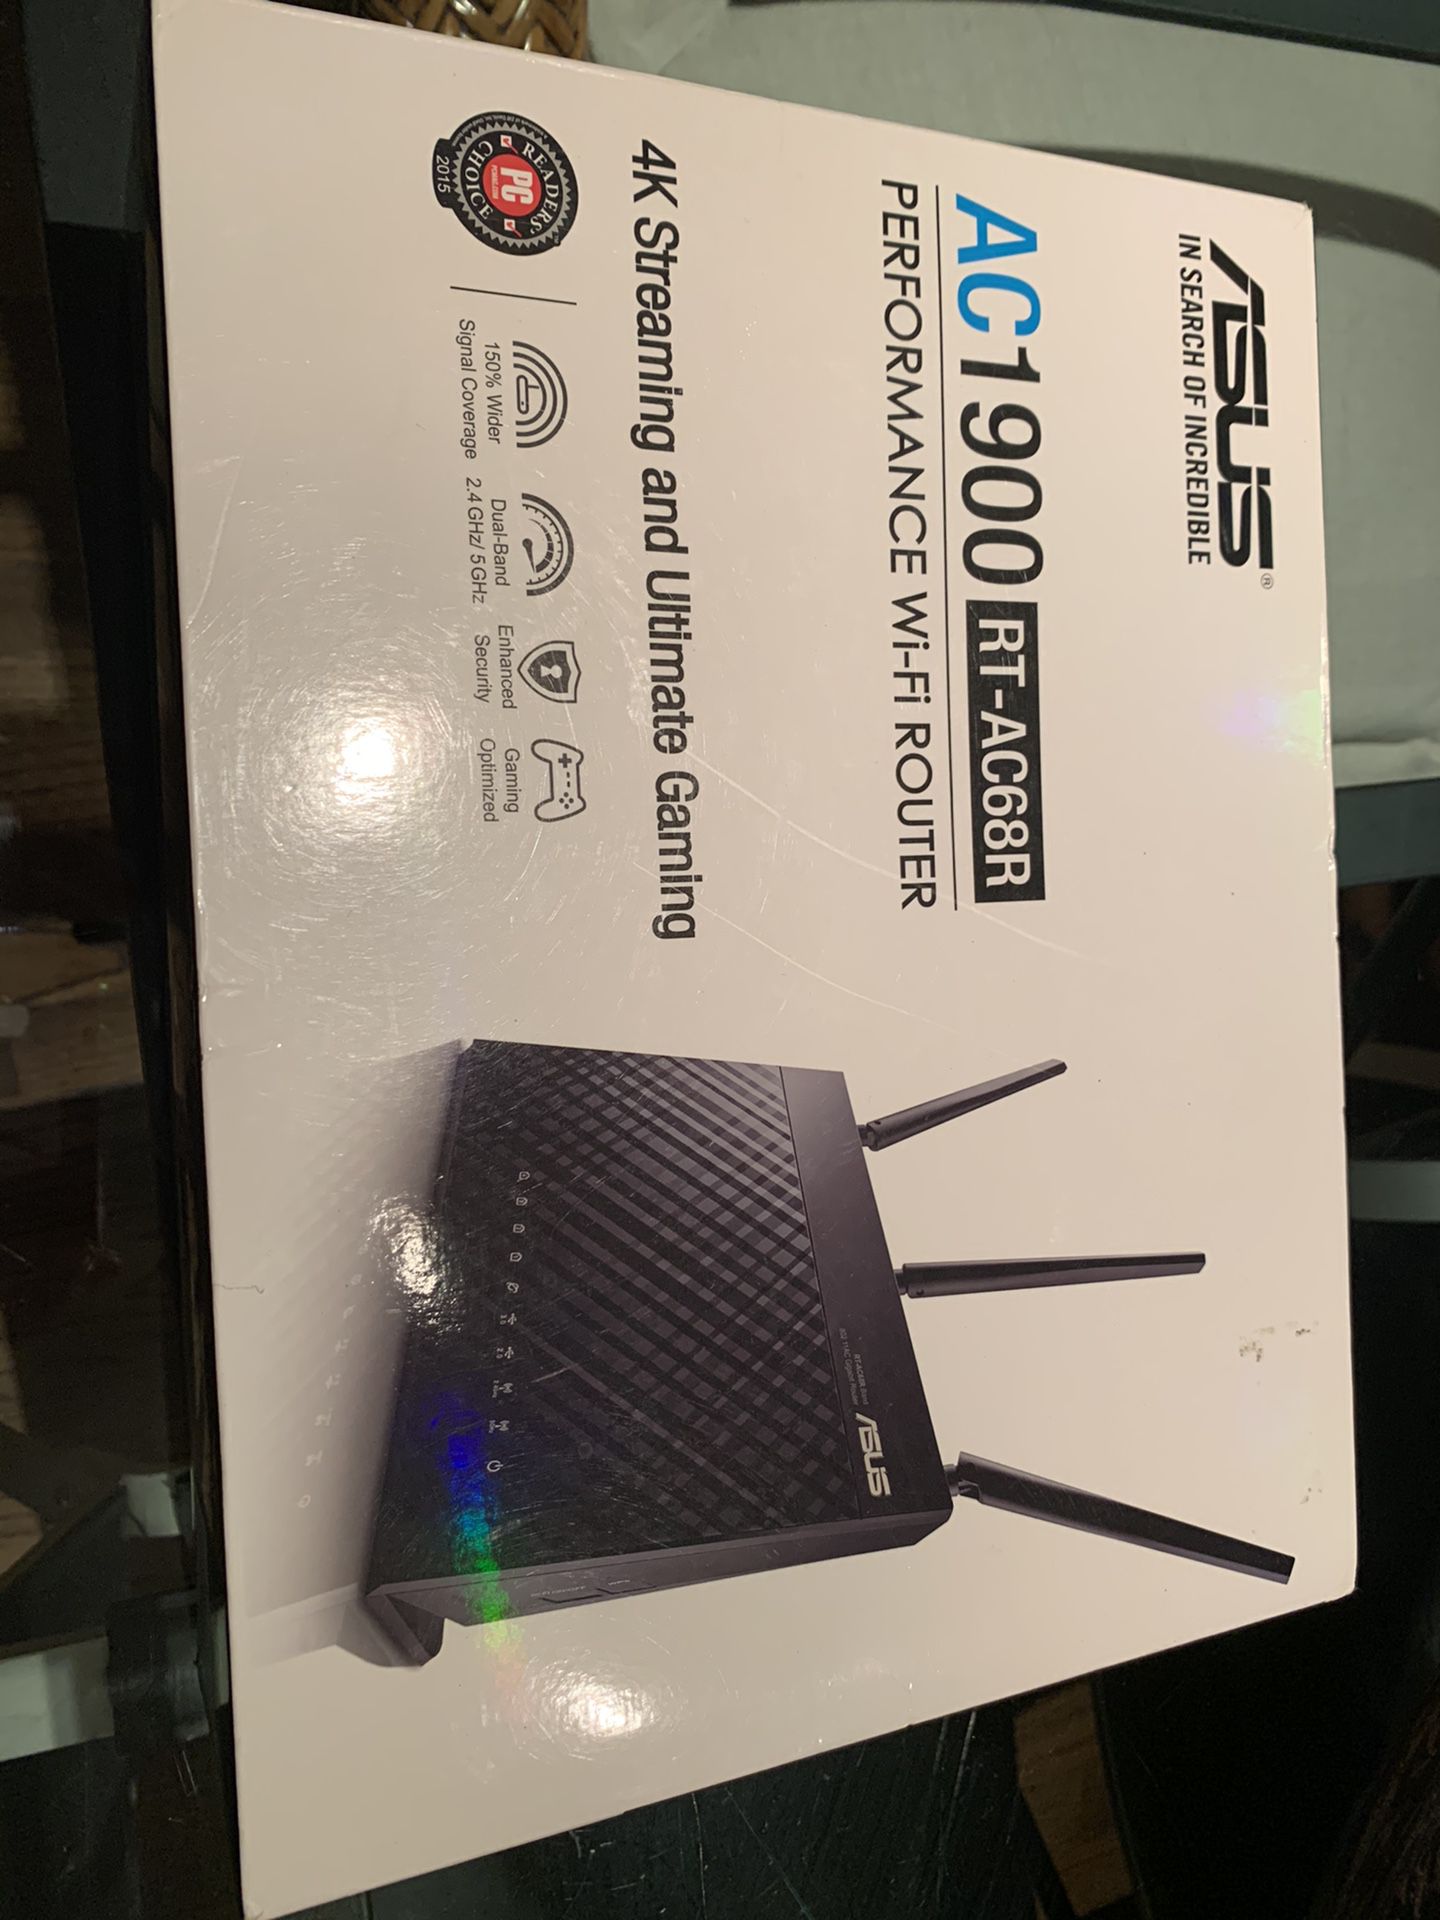 Asus AC1900 RT-AC66R Wi-Fi Router - Brand New